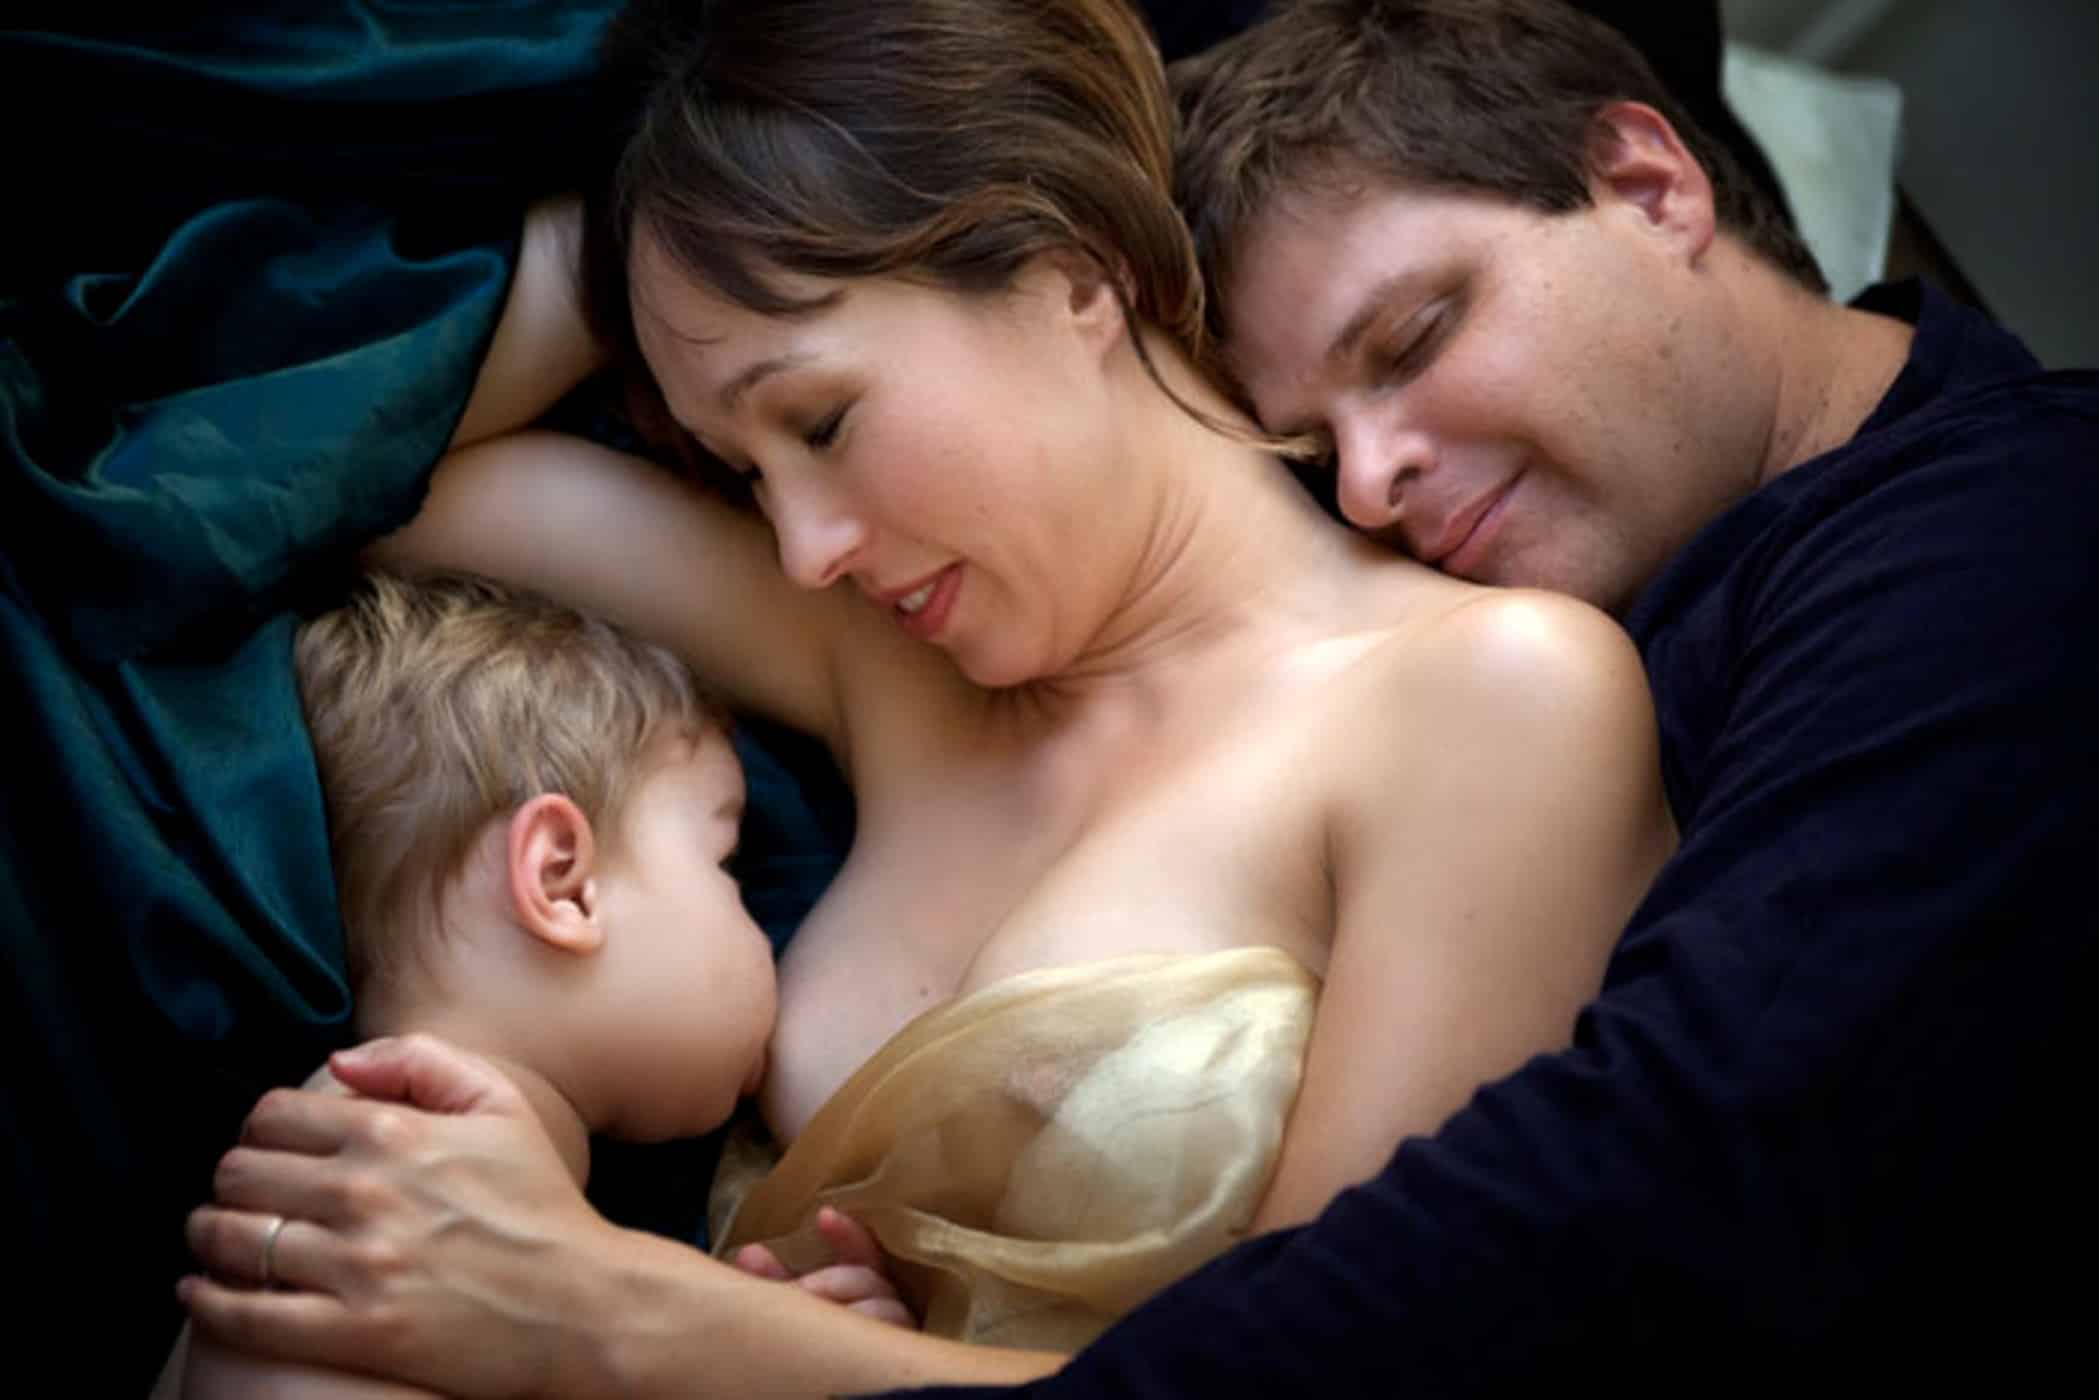 david kissel recommends sharing bed with mom pic